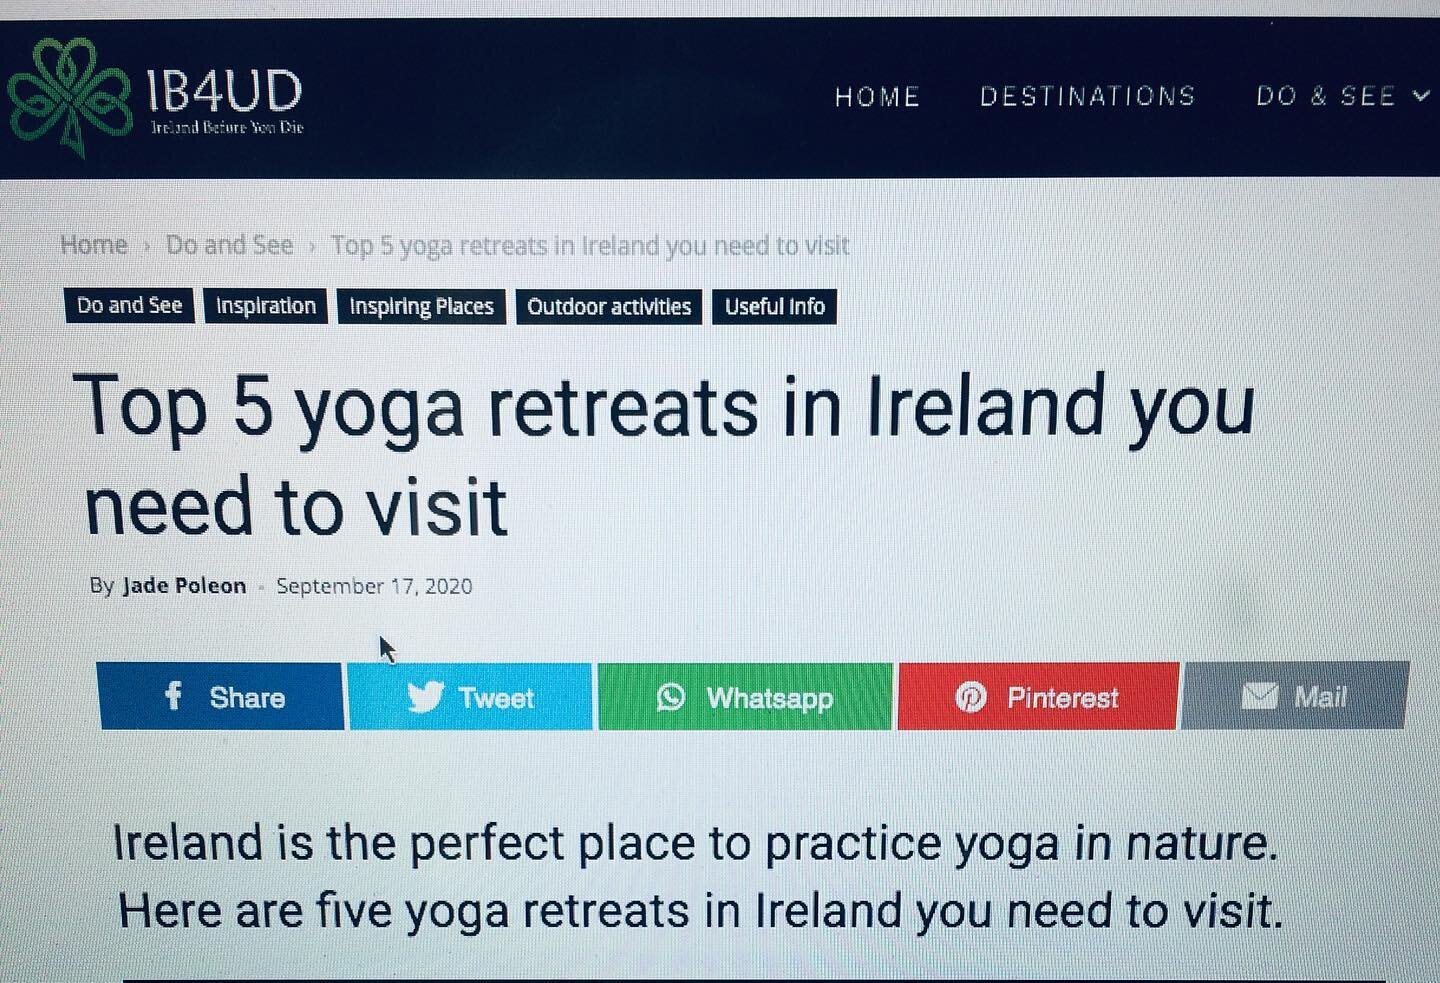 Delighted to be in The Top 5 Yoga Retreats In Ireland 🇮🇪 Thank you #ireland_before_you_die 🙏🏻 Link to article: https://www.irelandbeforeyoudie.com/top-5-yoga-retreats-in-ireland-you-need-to-visit/

#yoga #retreats #top5 #peace #ireland #irelandtr